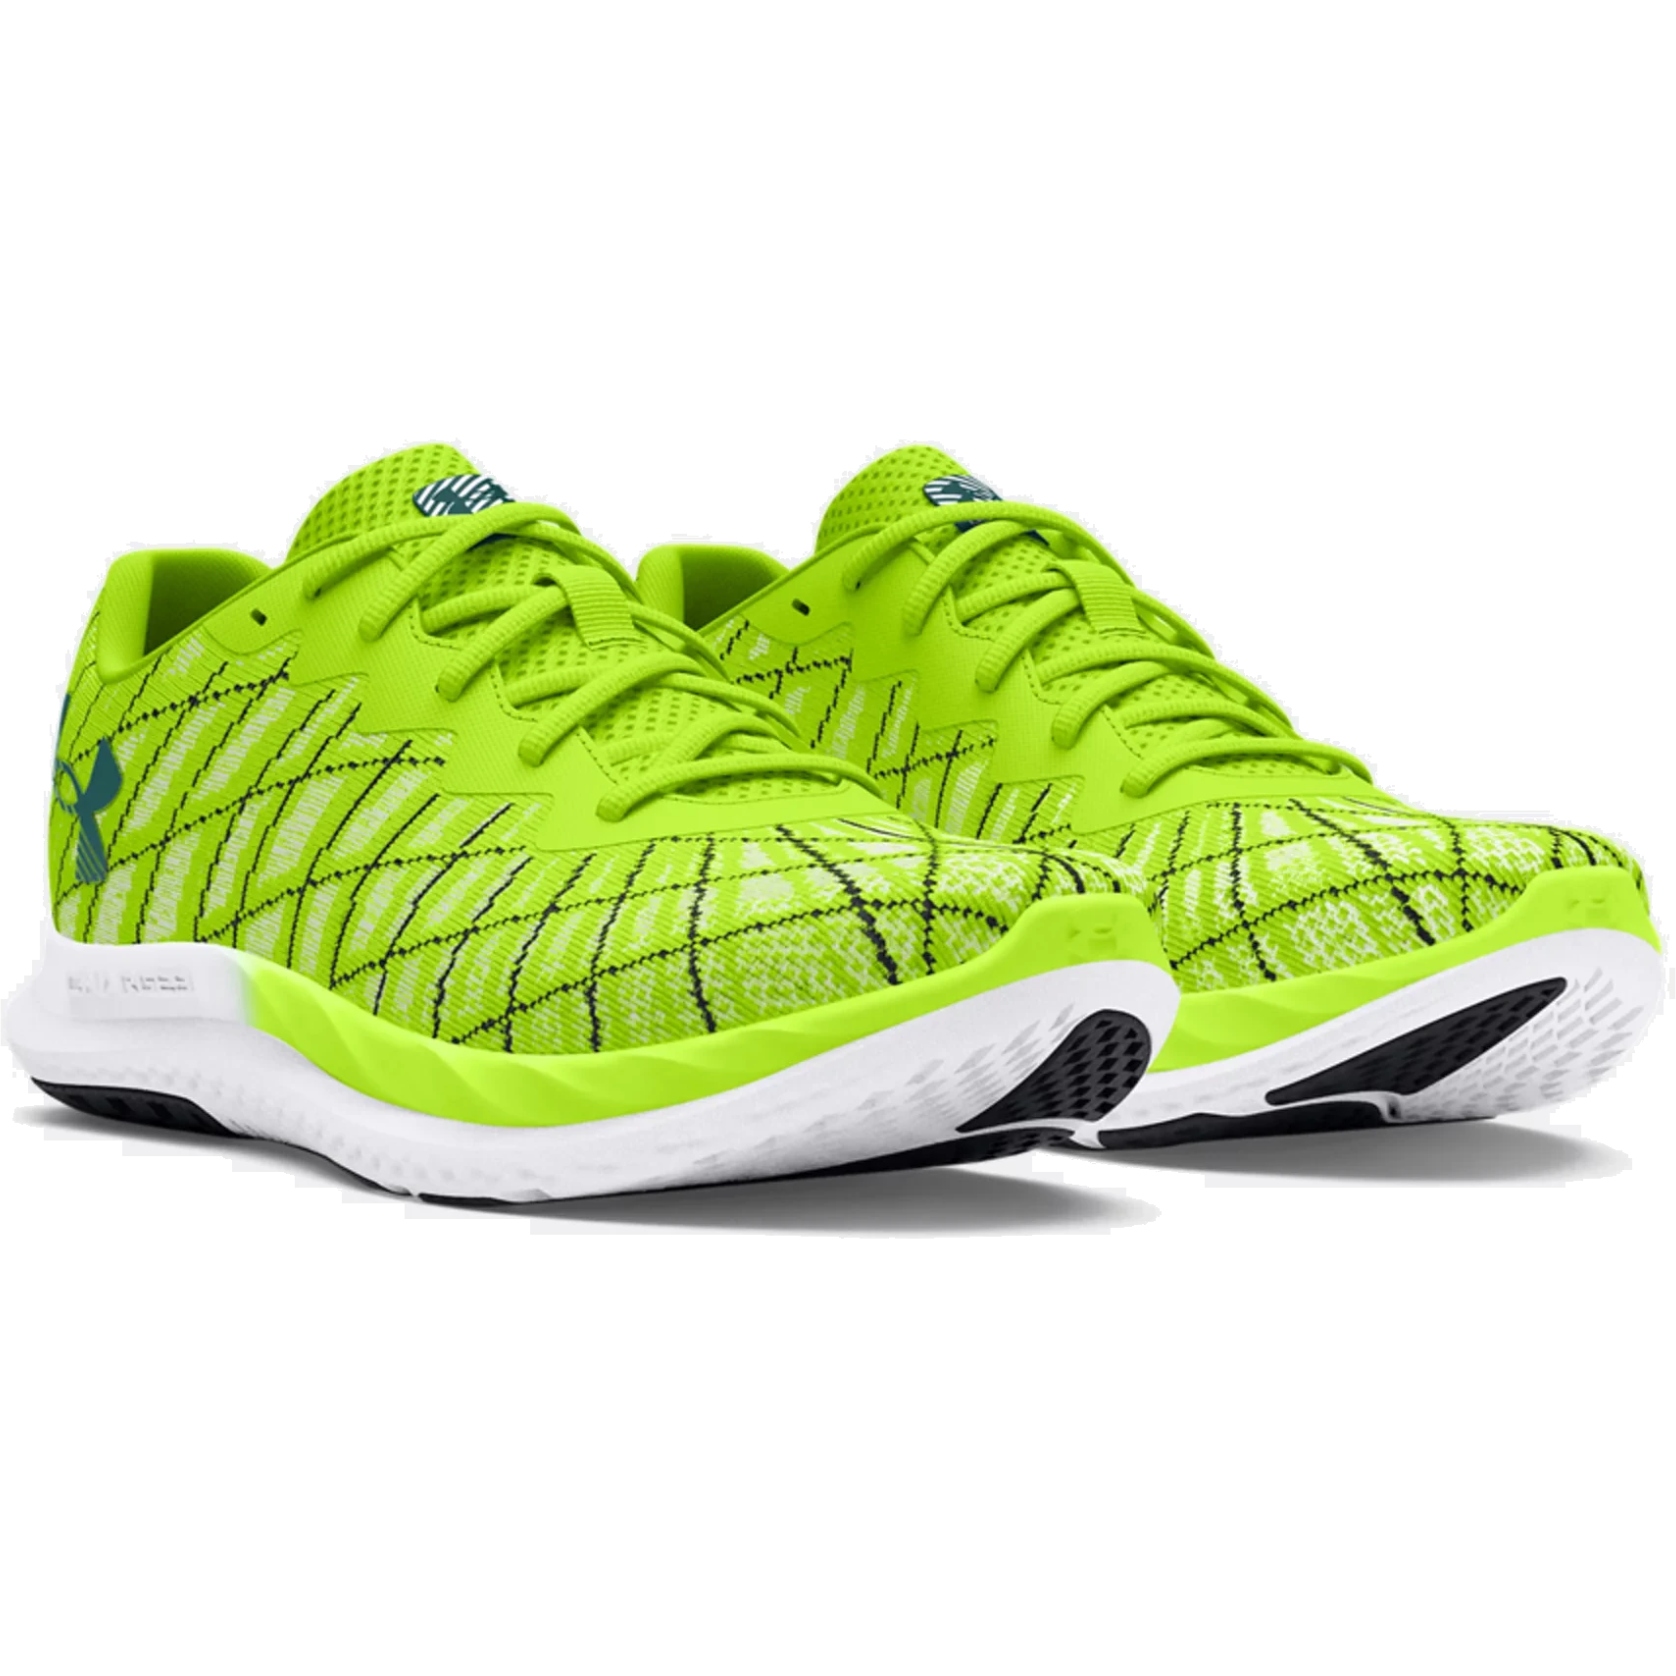 Picture of Under Armour UA Charged Breeze 2 Running Shoes Men - High Vis Yellow/Black/Hydro Teal